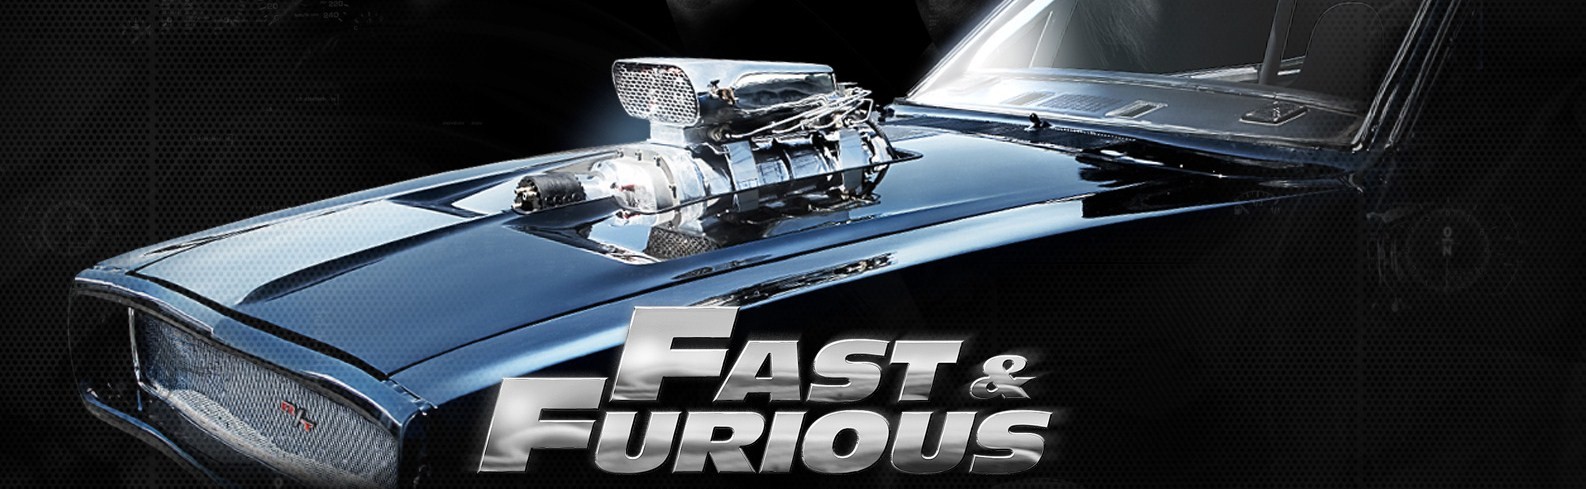 vin diesel fast and furious 4. vin diesel fast and furious